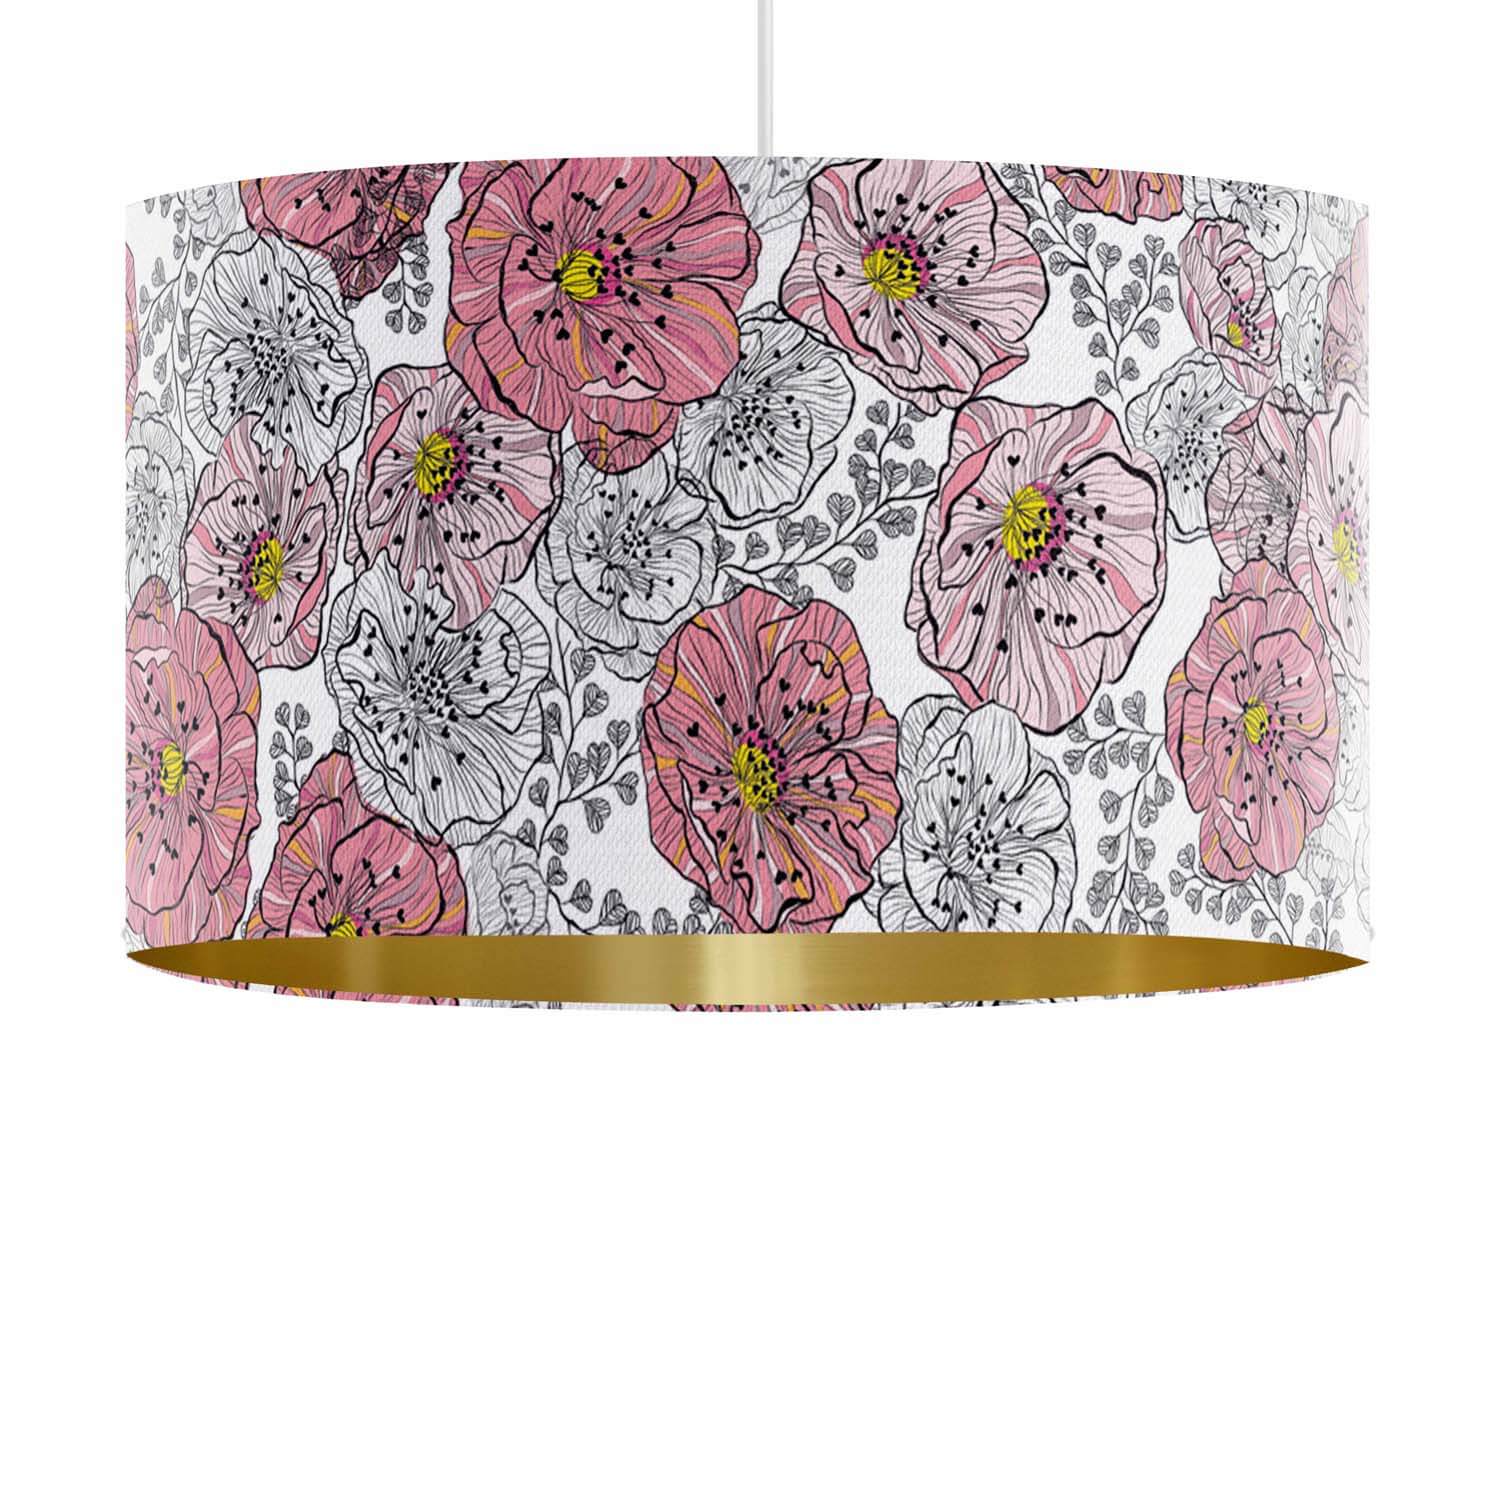 Sketch Roses - Paradise Garden - House Of Turnowsky Lampshade